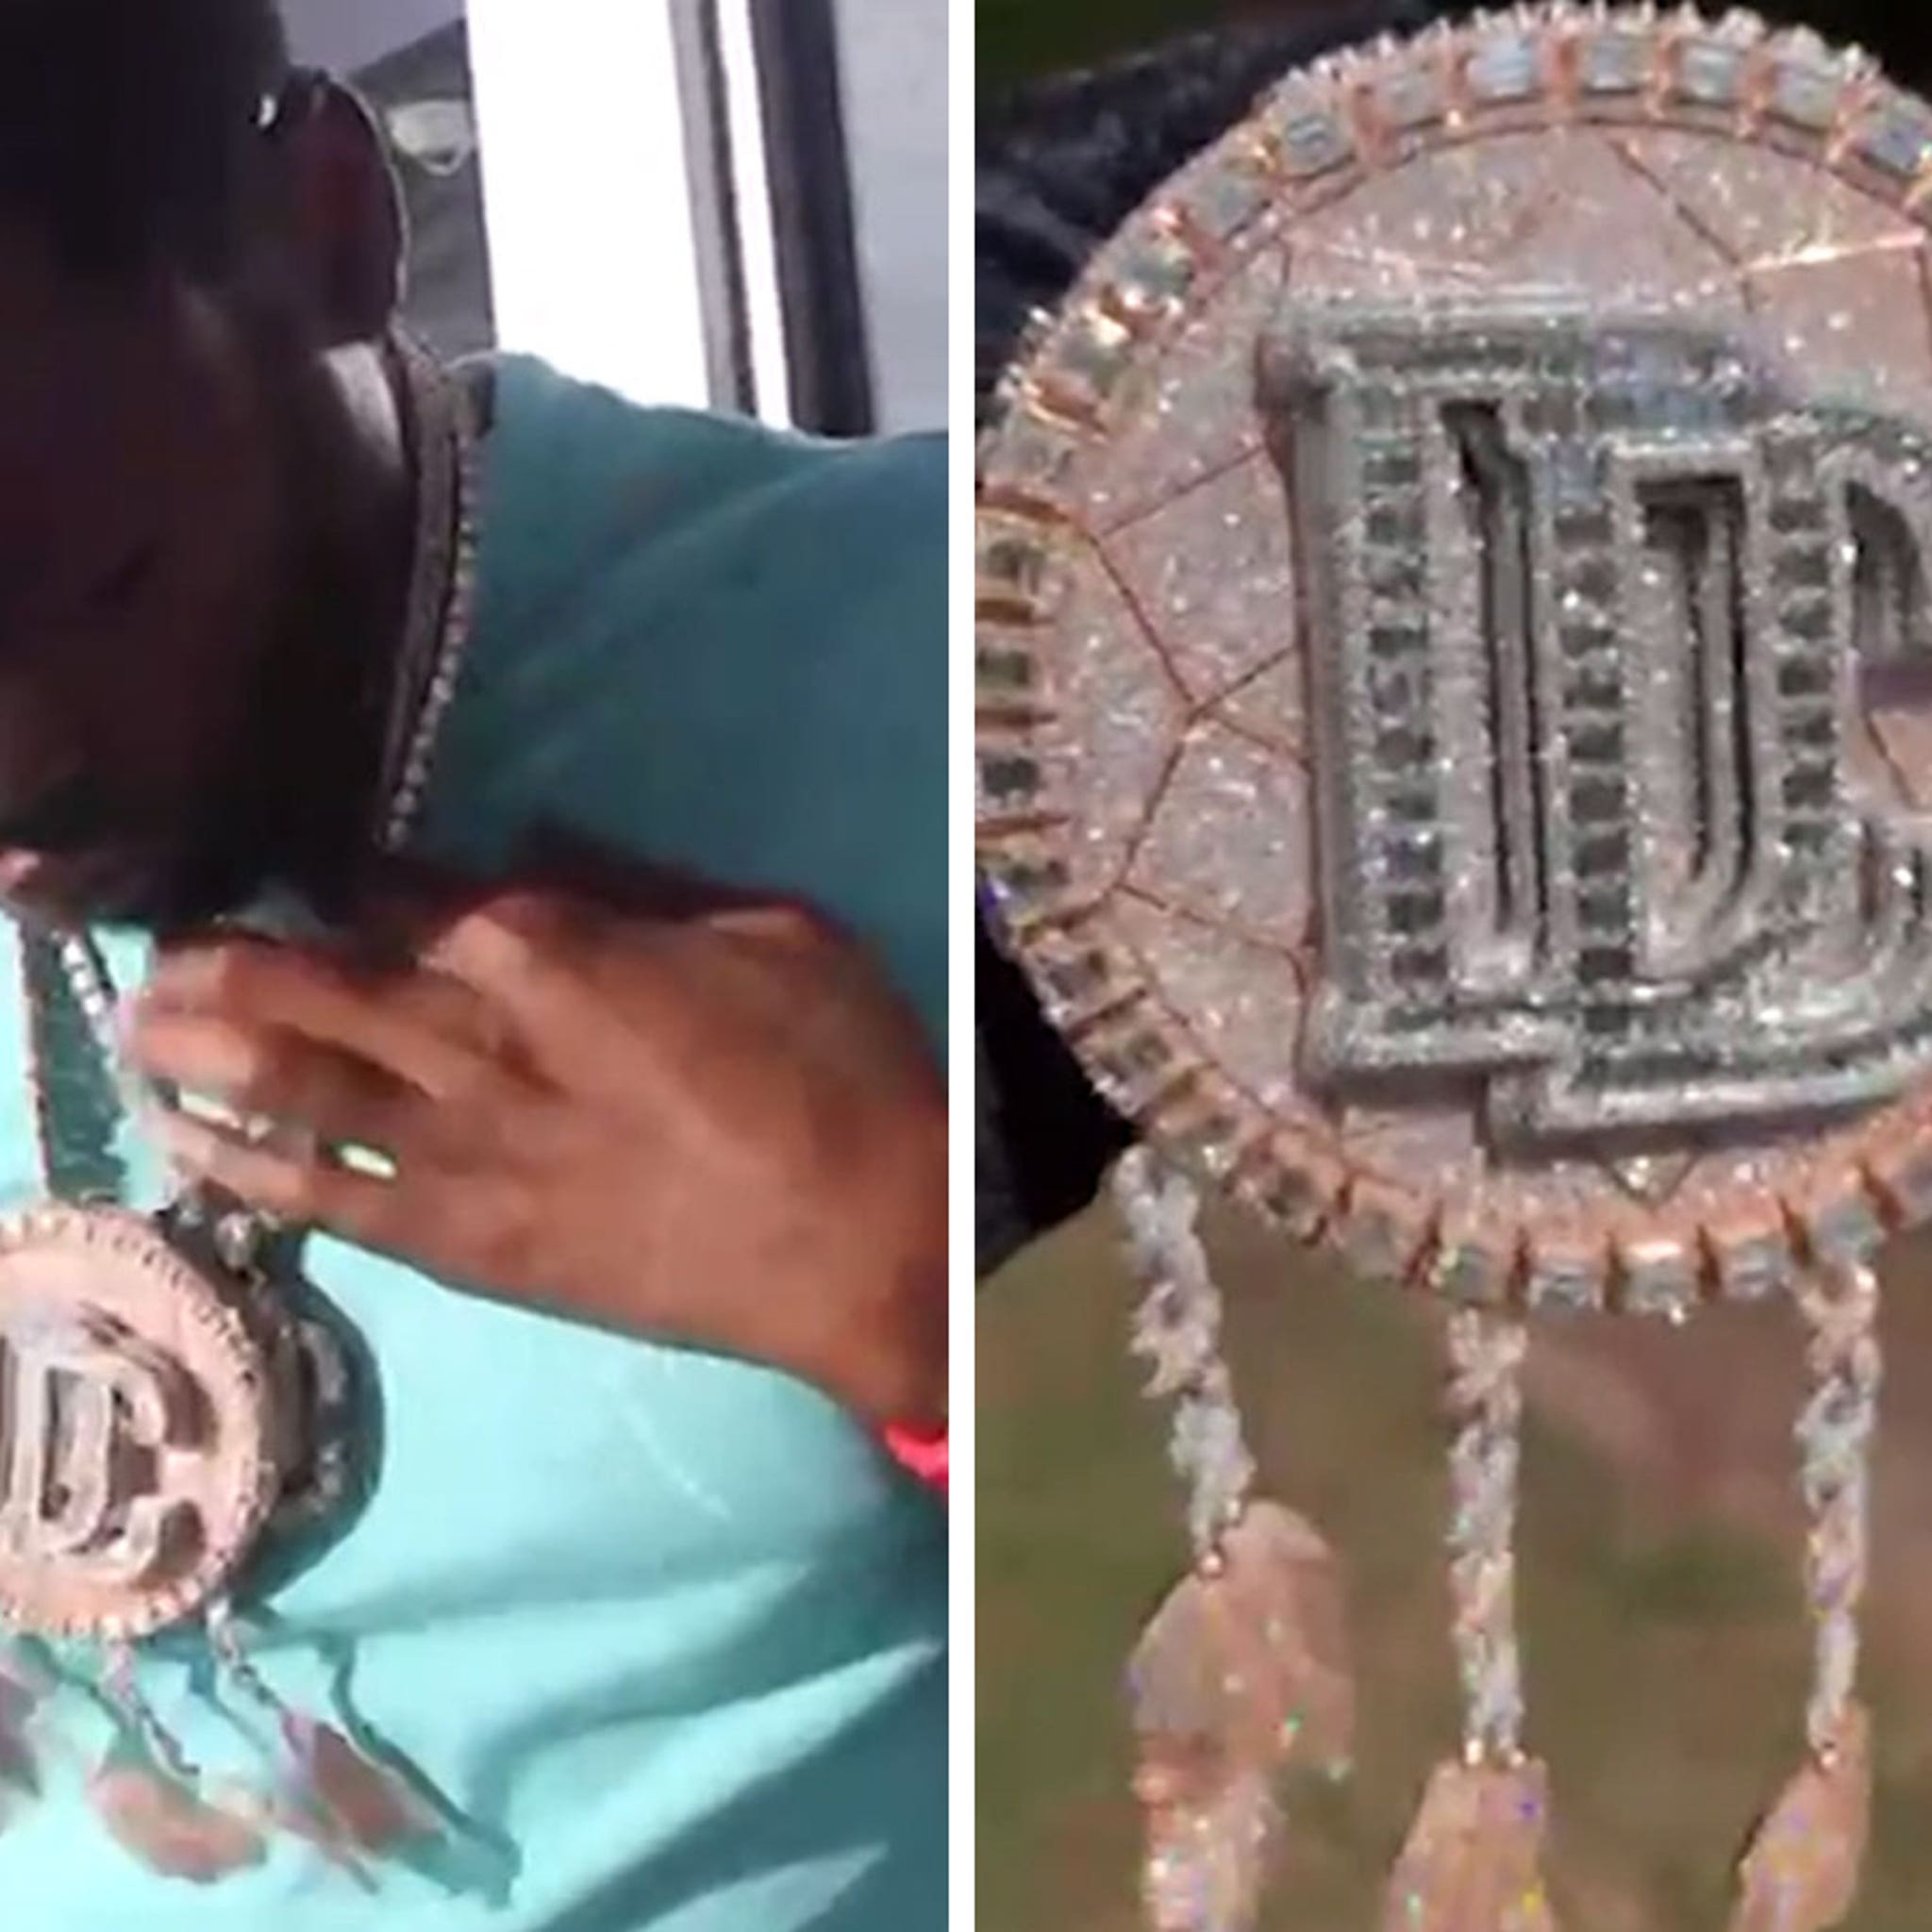 Meek Mill Splurges $200K on Dreamchasers Chain After Roc Nation